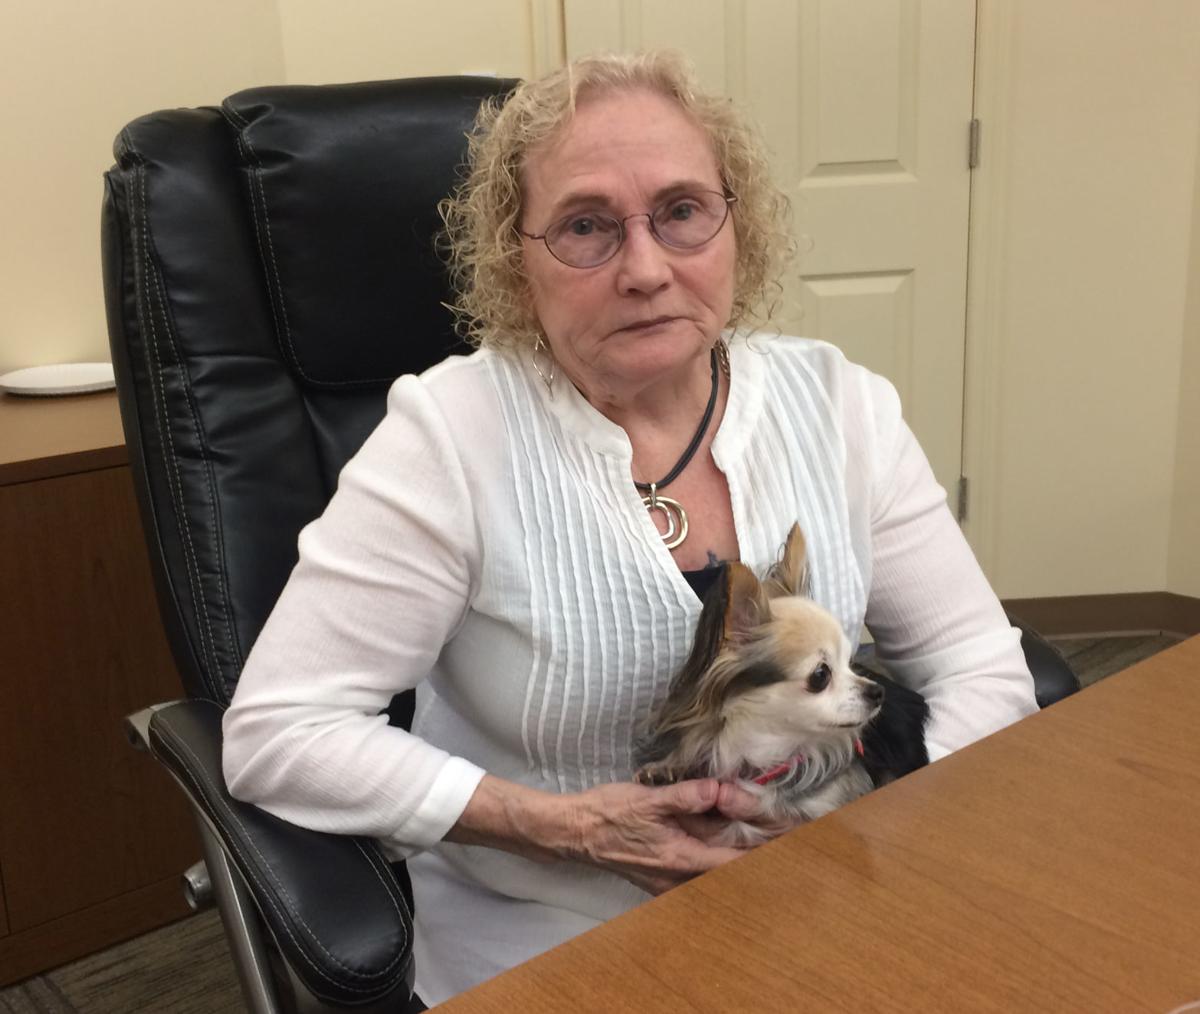 Woman's fight got Glens Falls Housing Authority to change policy on support animals